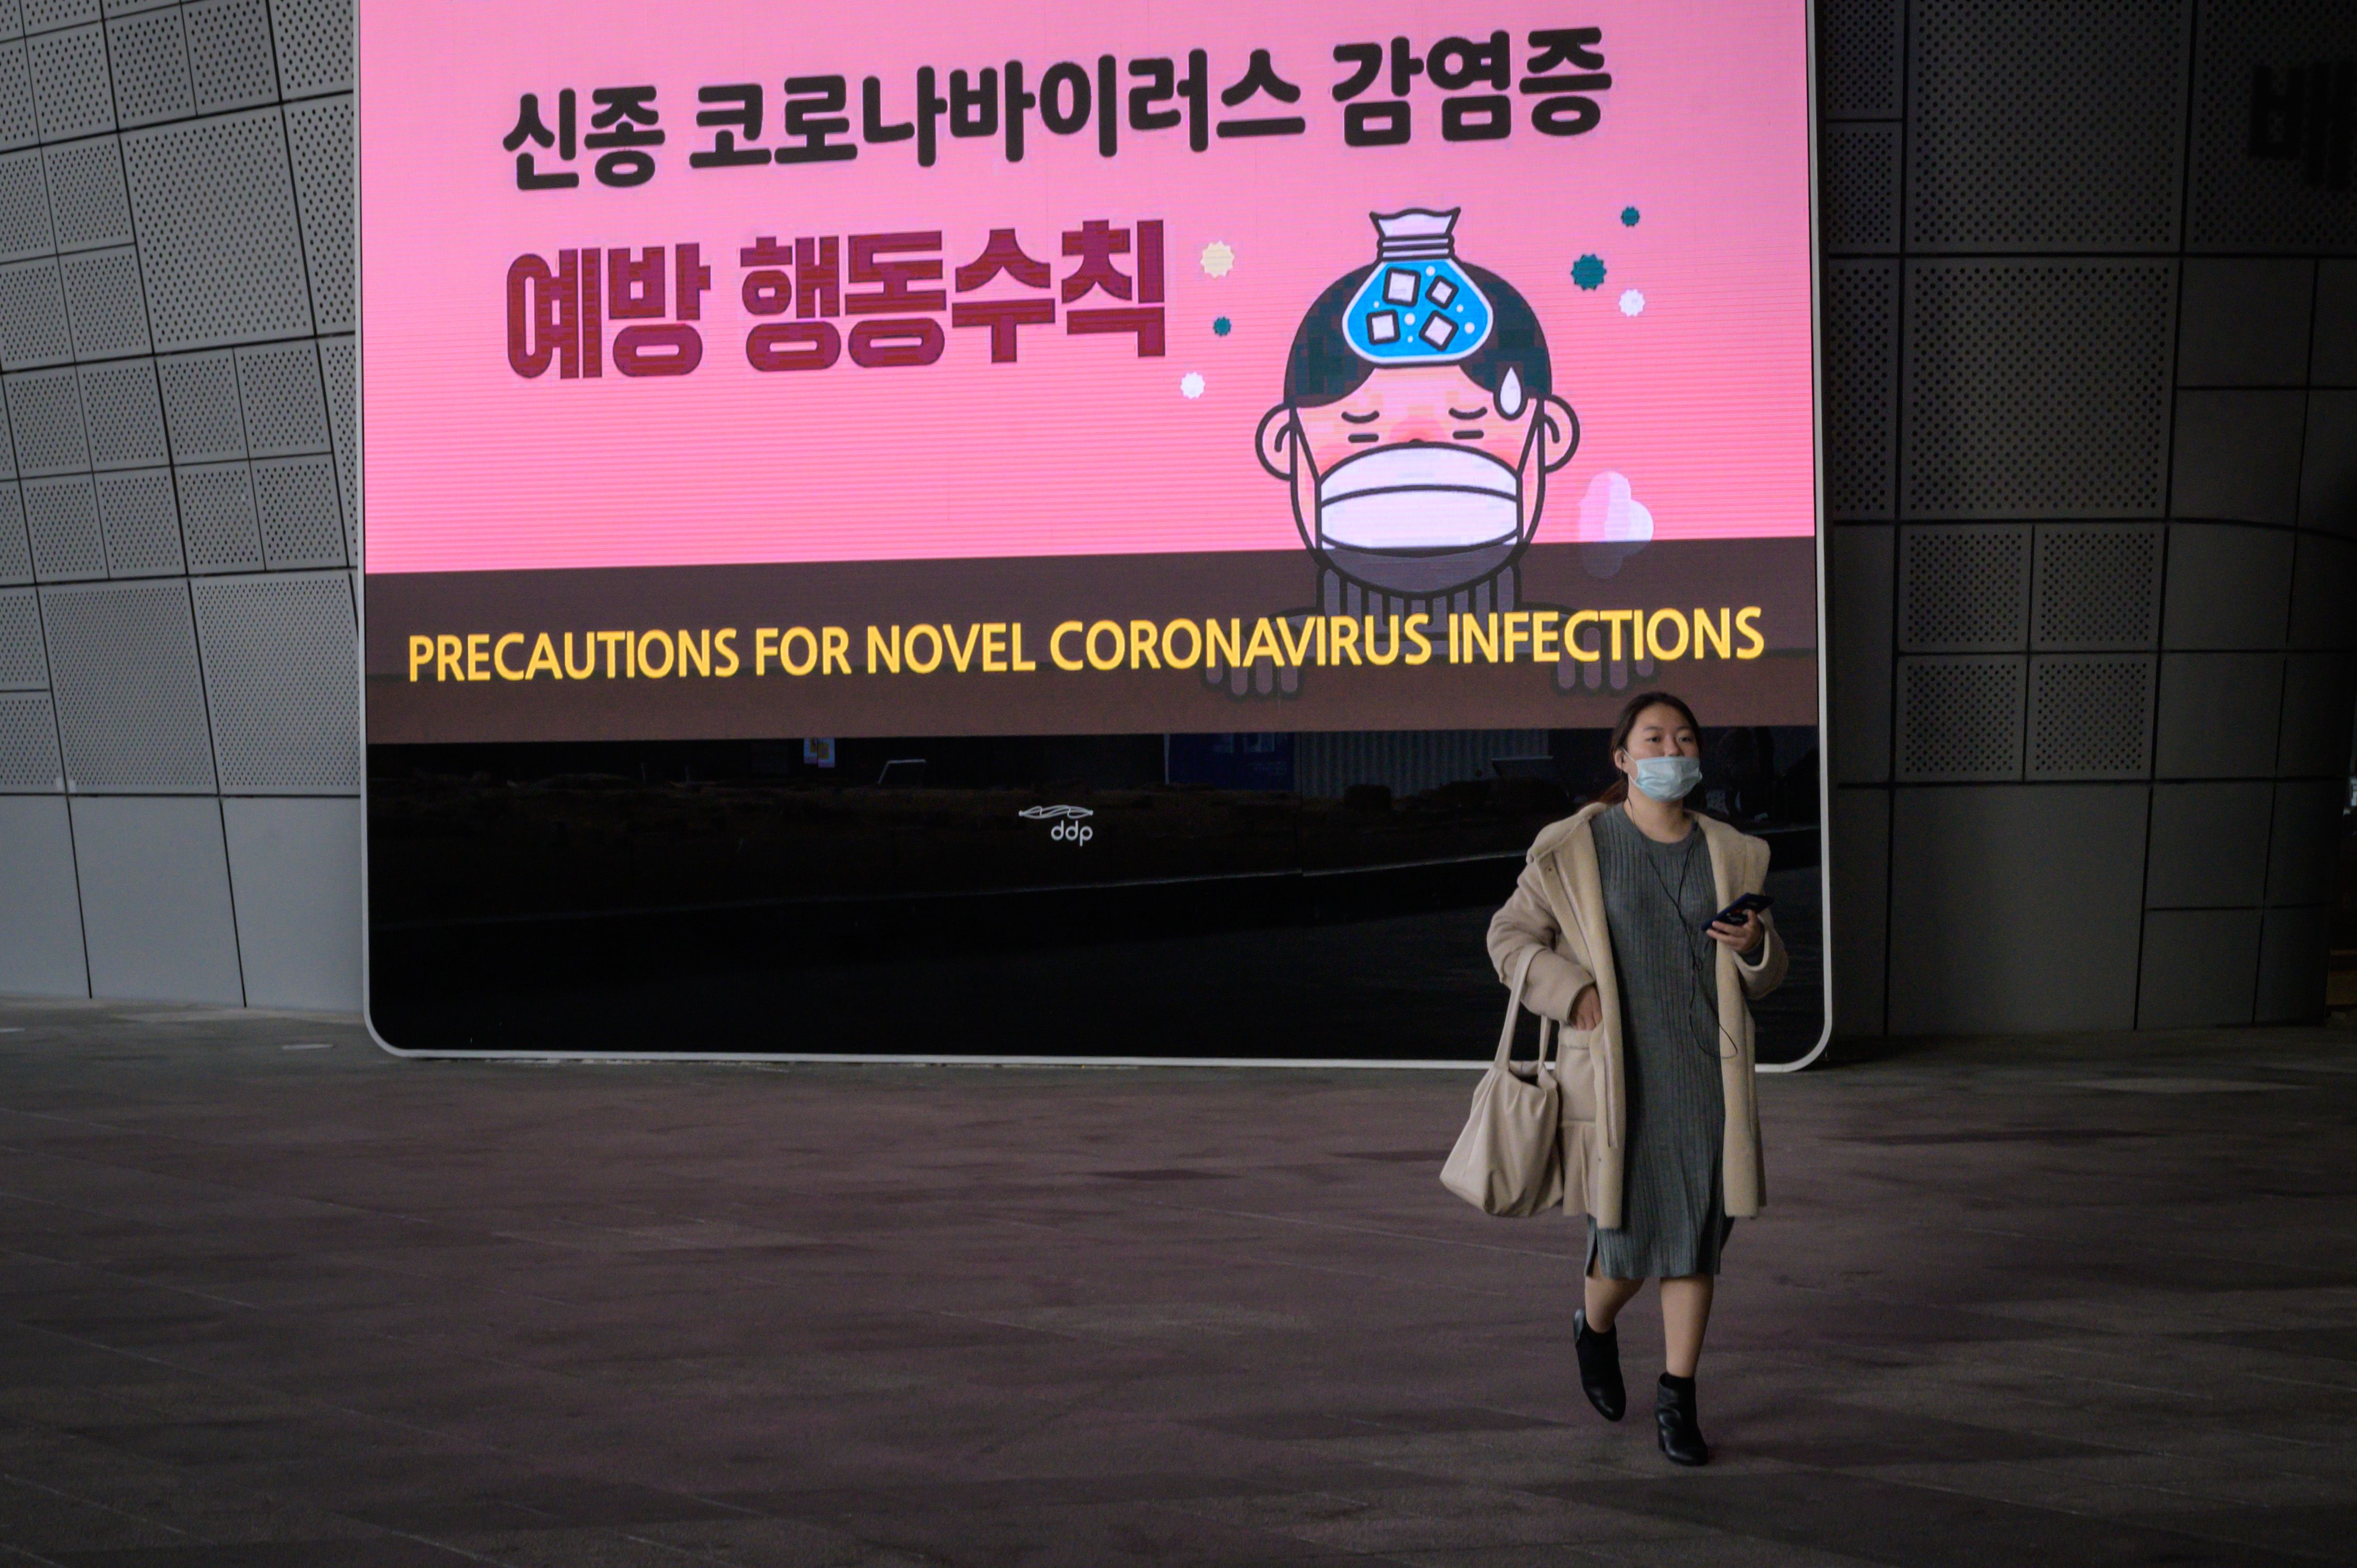 A woman wearing a face mask walks before a screen displaying preventative measures against the novel coronavirus, at Dongdaemun Design Plaza in Seoul. 